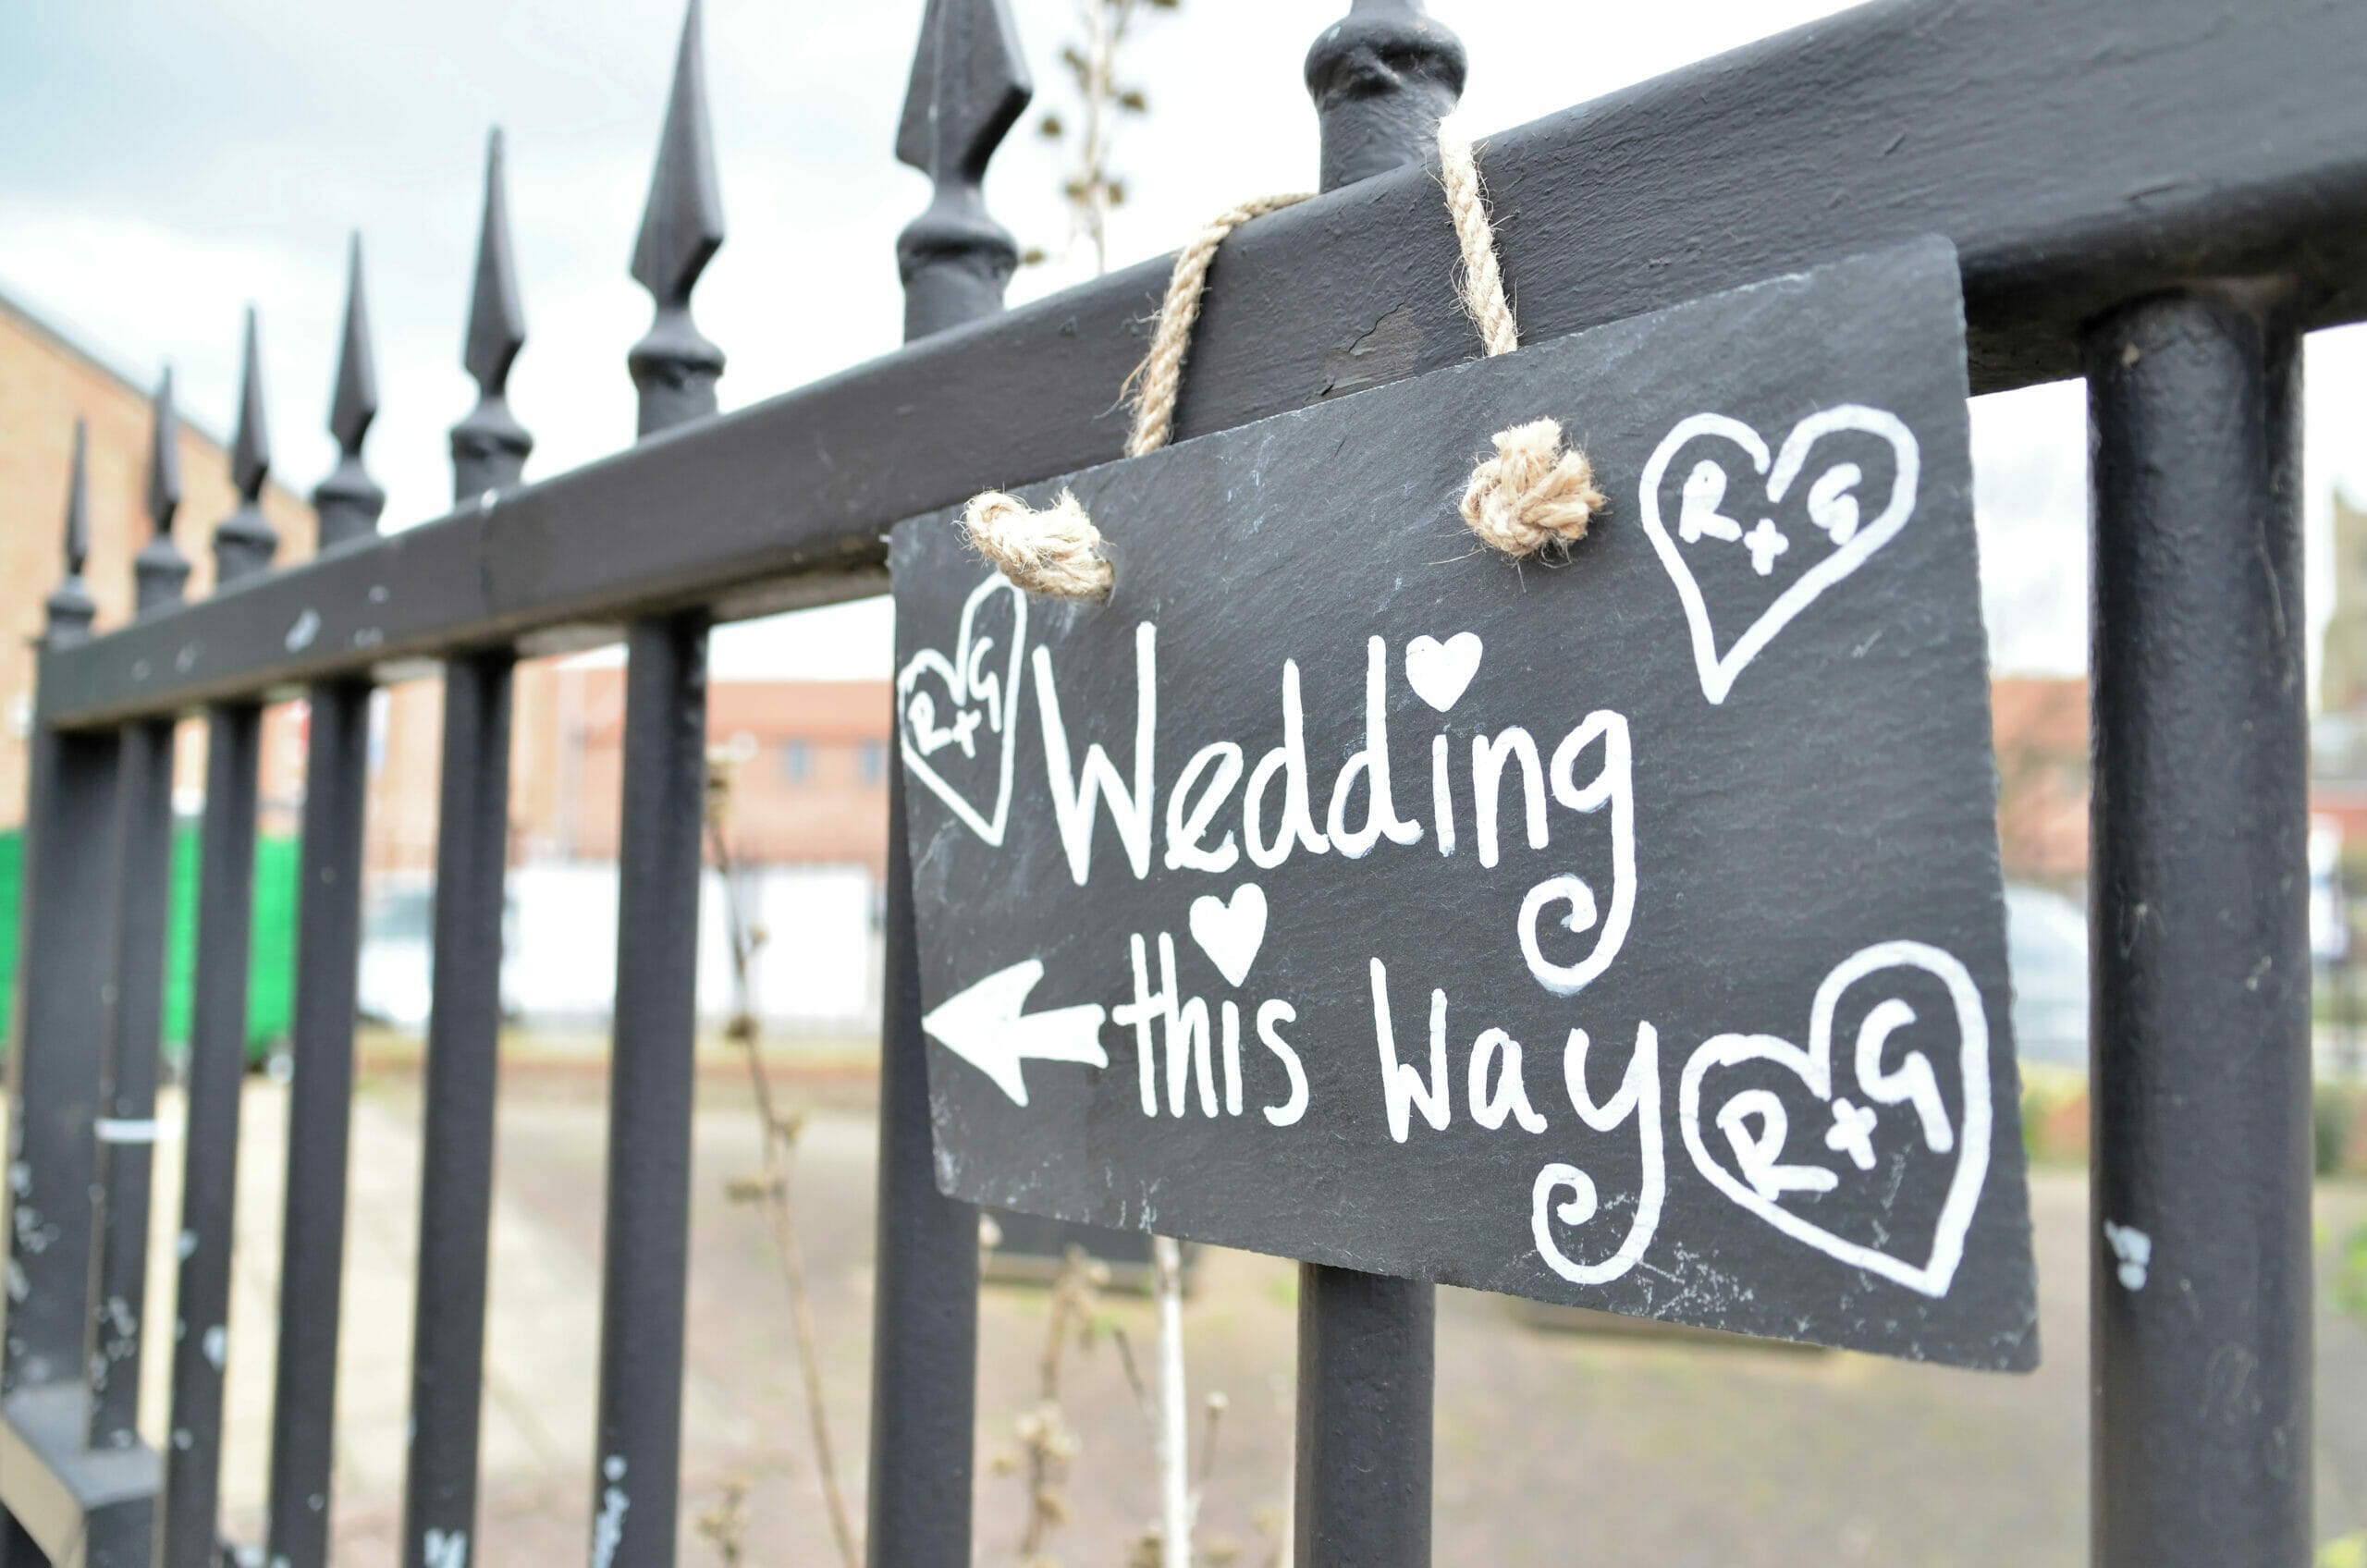 Photo shows a sign signing wedding this way